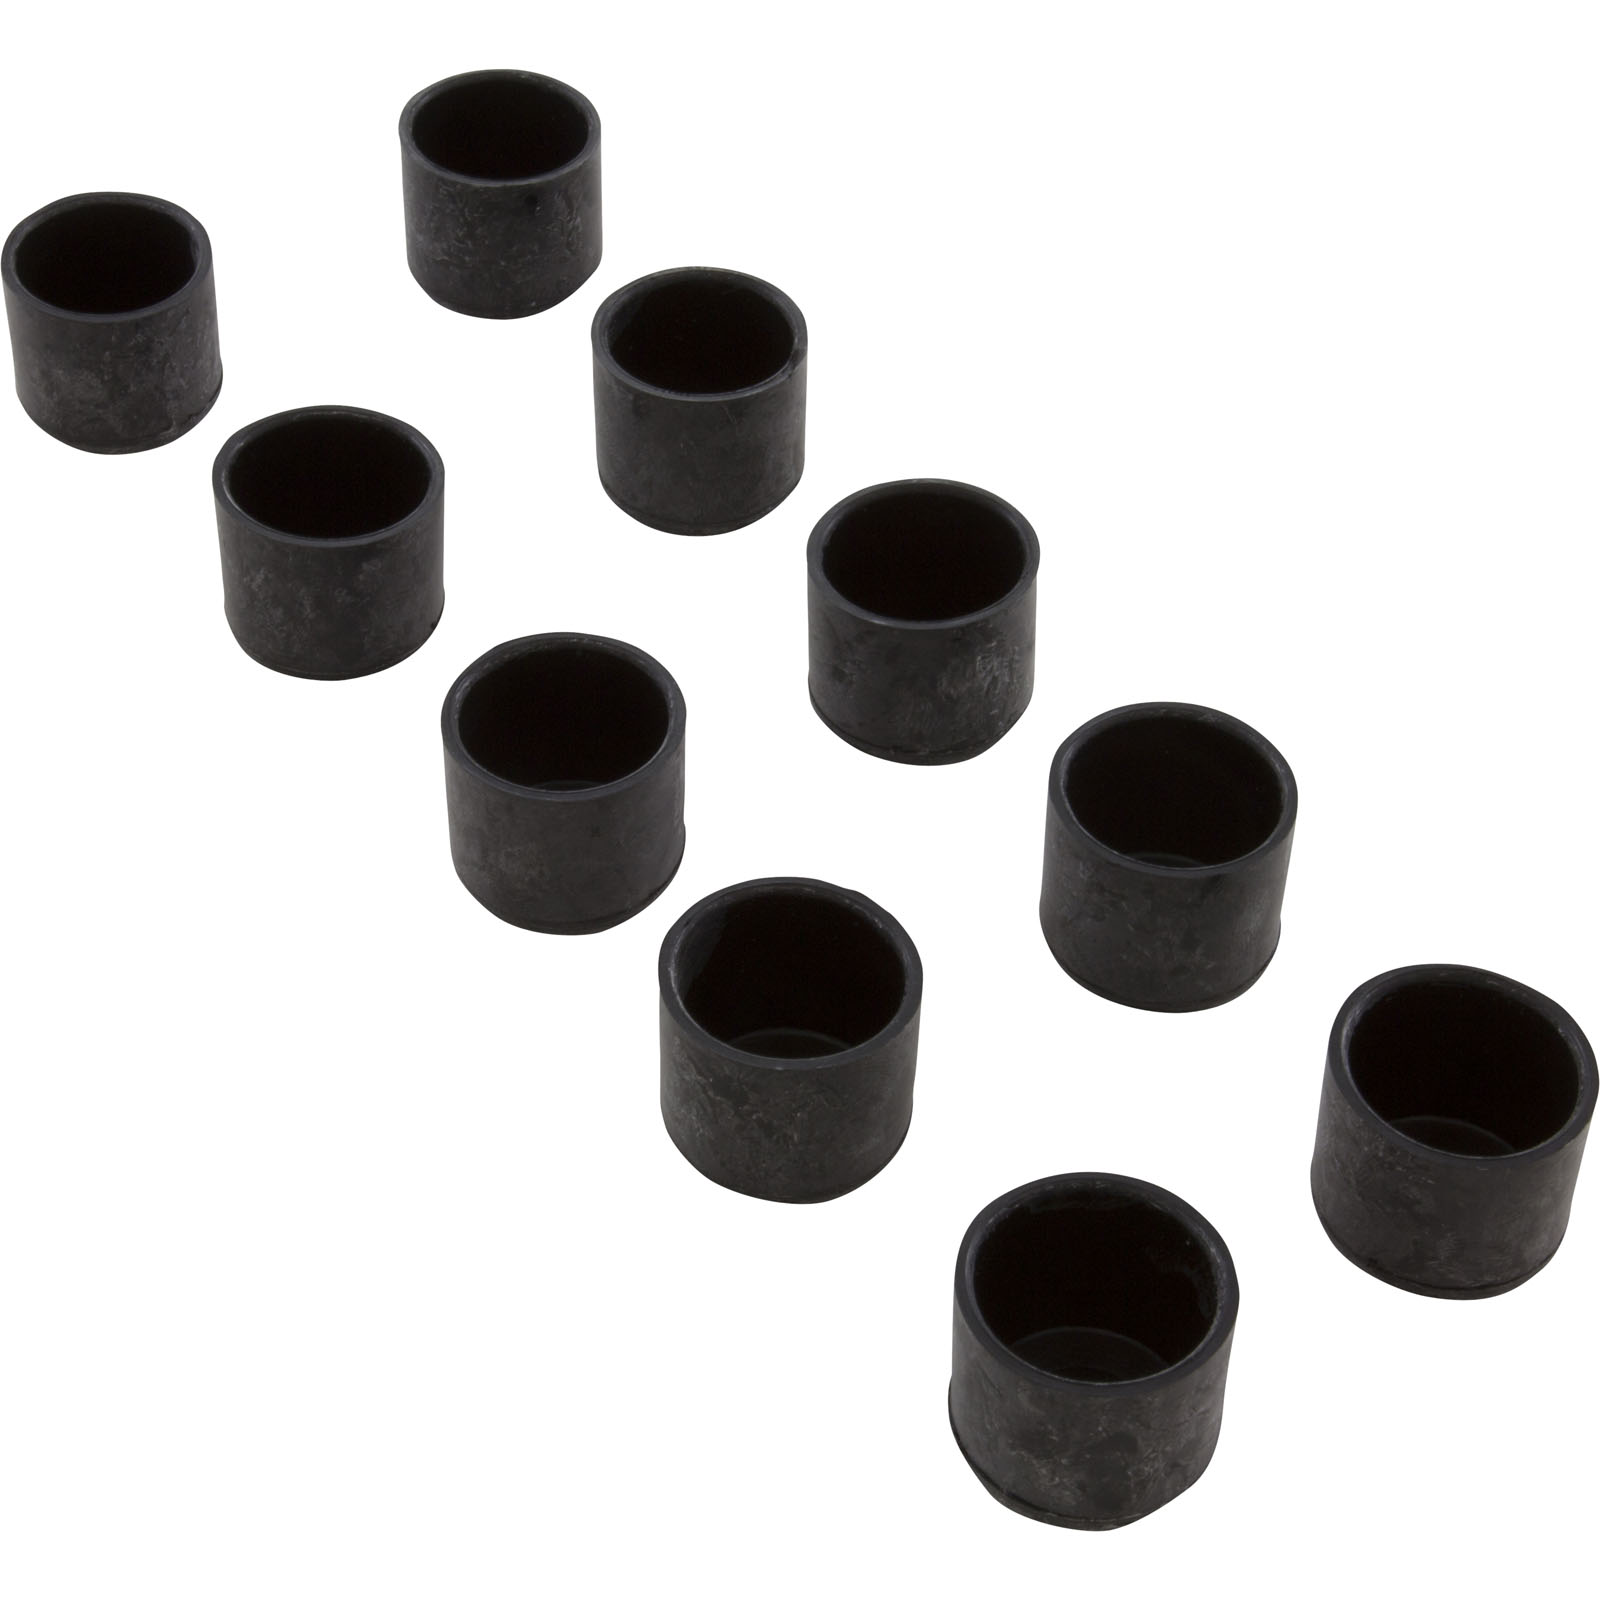 Picture of Fence Post Cap, GLI Pool Products, Vinyl, Black, Qty 10